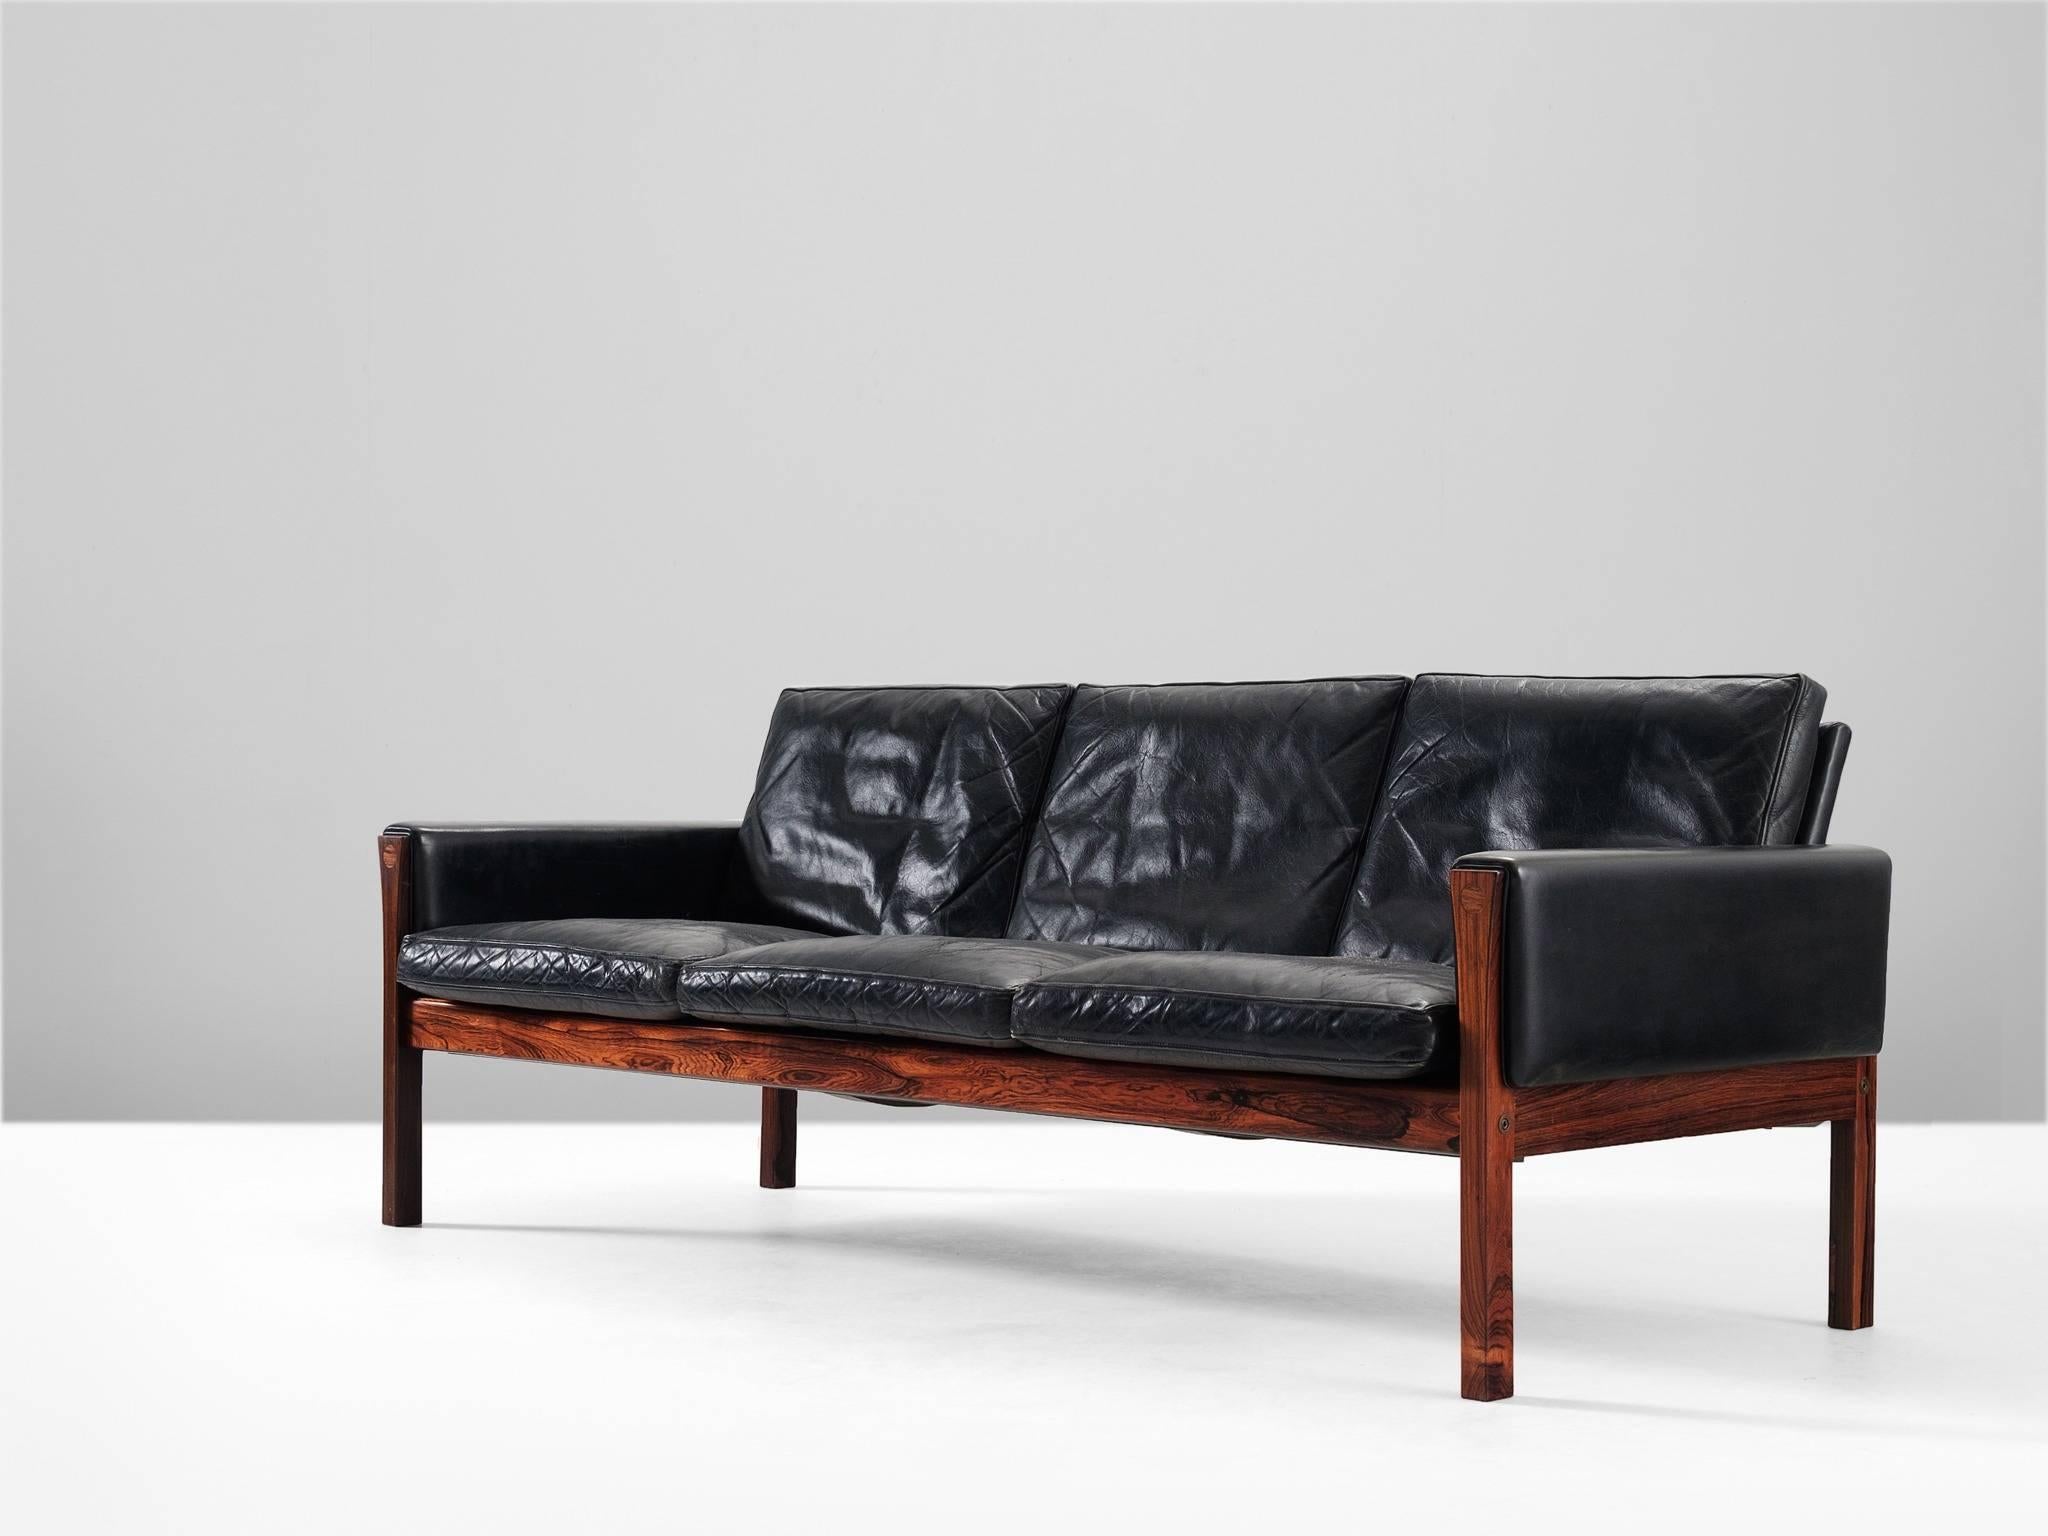 Three seat sofa, in black leather and rosewood, by Hans J. Wegner, Denmark, 1960s. 

Excellent designed sofa by Hans Wegner. The straight lines of this design show an amazing elegance. The rosewood frame is well proportioned. The way the legs